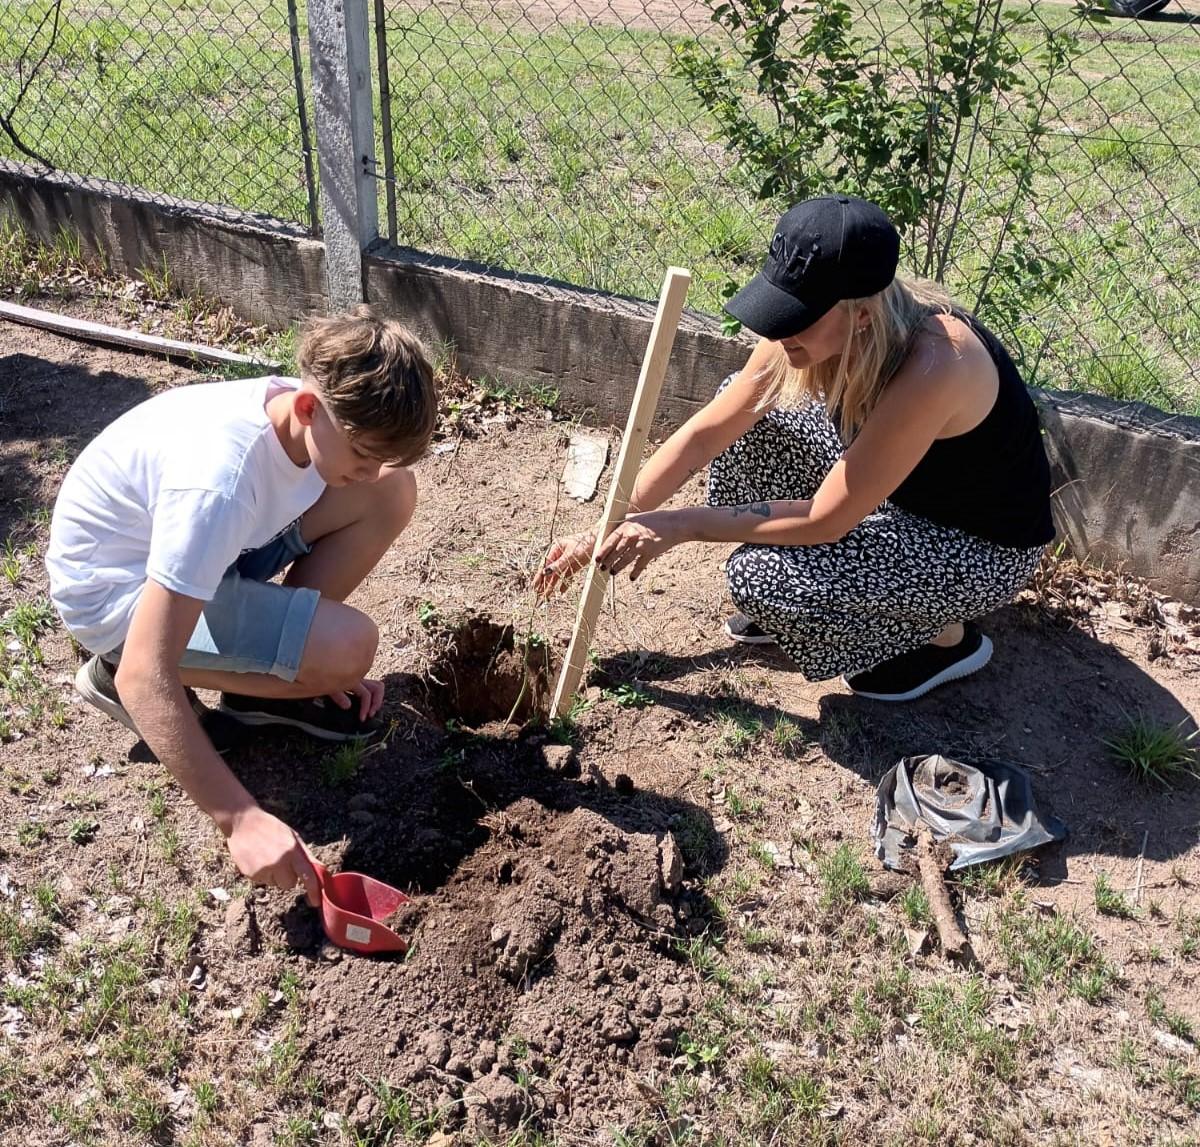 An adult and child digging a hole.